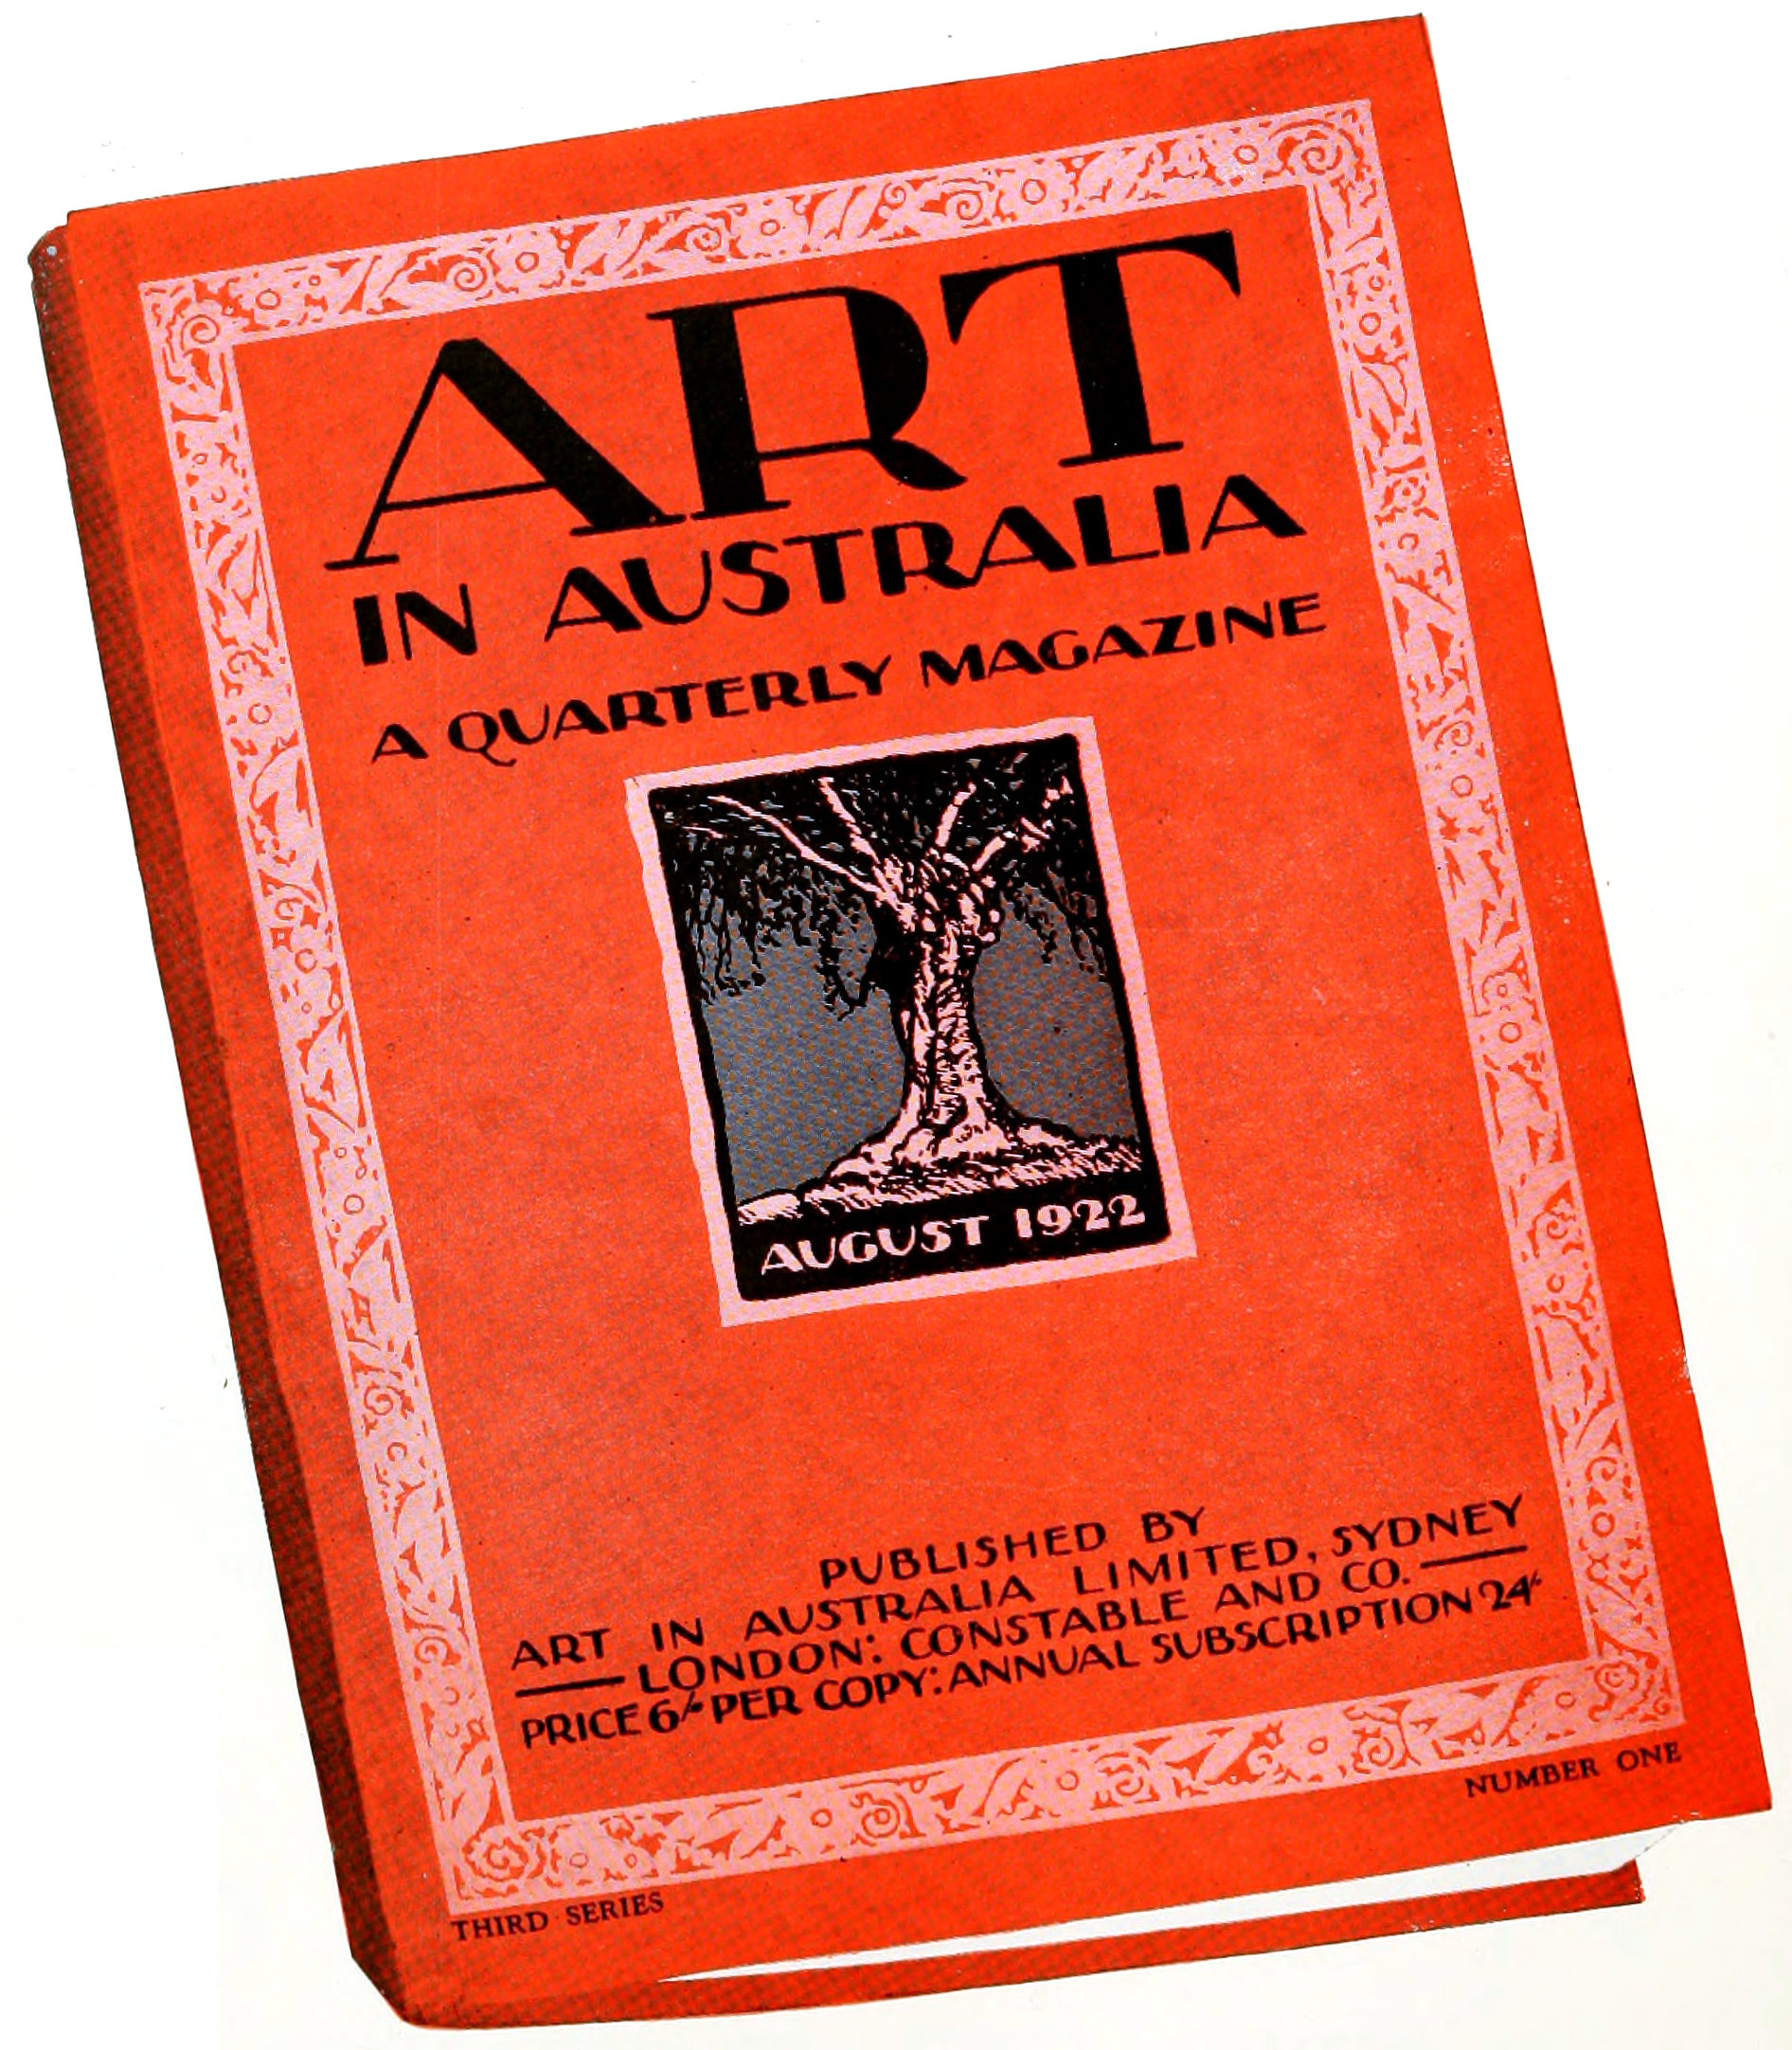 ART IN AUSTRALIA A QUARTERLY MAGAZINE AUGUST 1922 PUBLISHED BY ART IN AUSTRALIA LIMITED, SYDNEY ——LONDON: CONSTABLE AND CO.—— PRICE 6⁄⁰⁰ PER COPY:ANNUAL SUBSCRIPTION 24 THIRD SERIES      NUMBER ONE